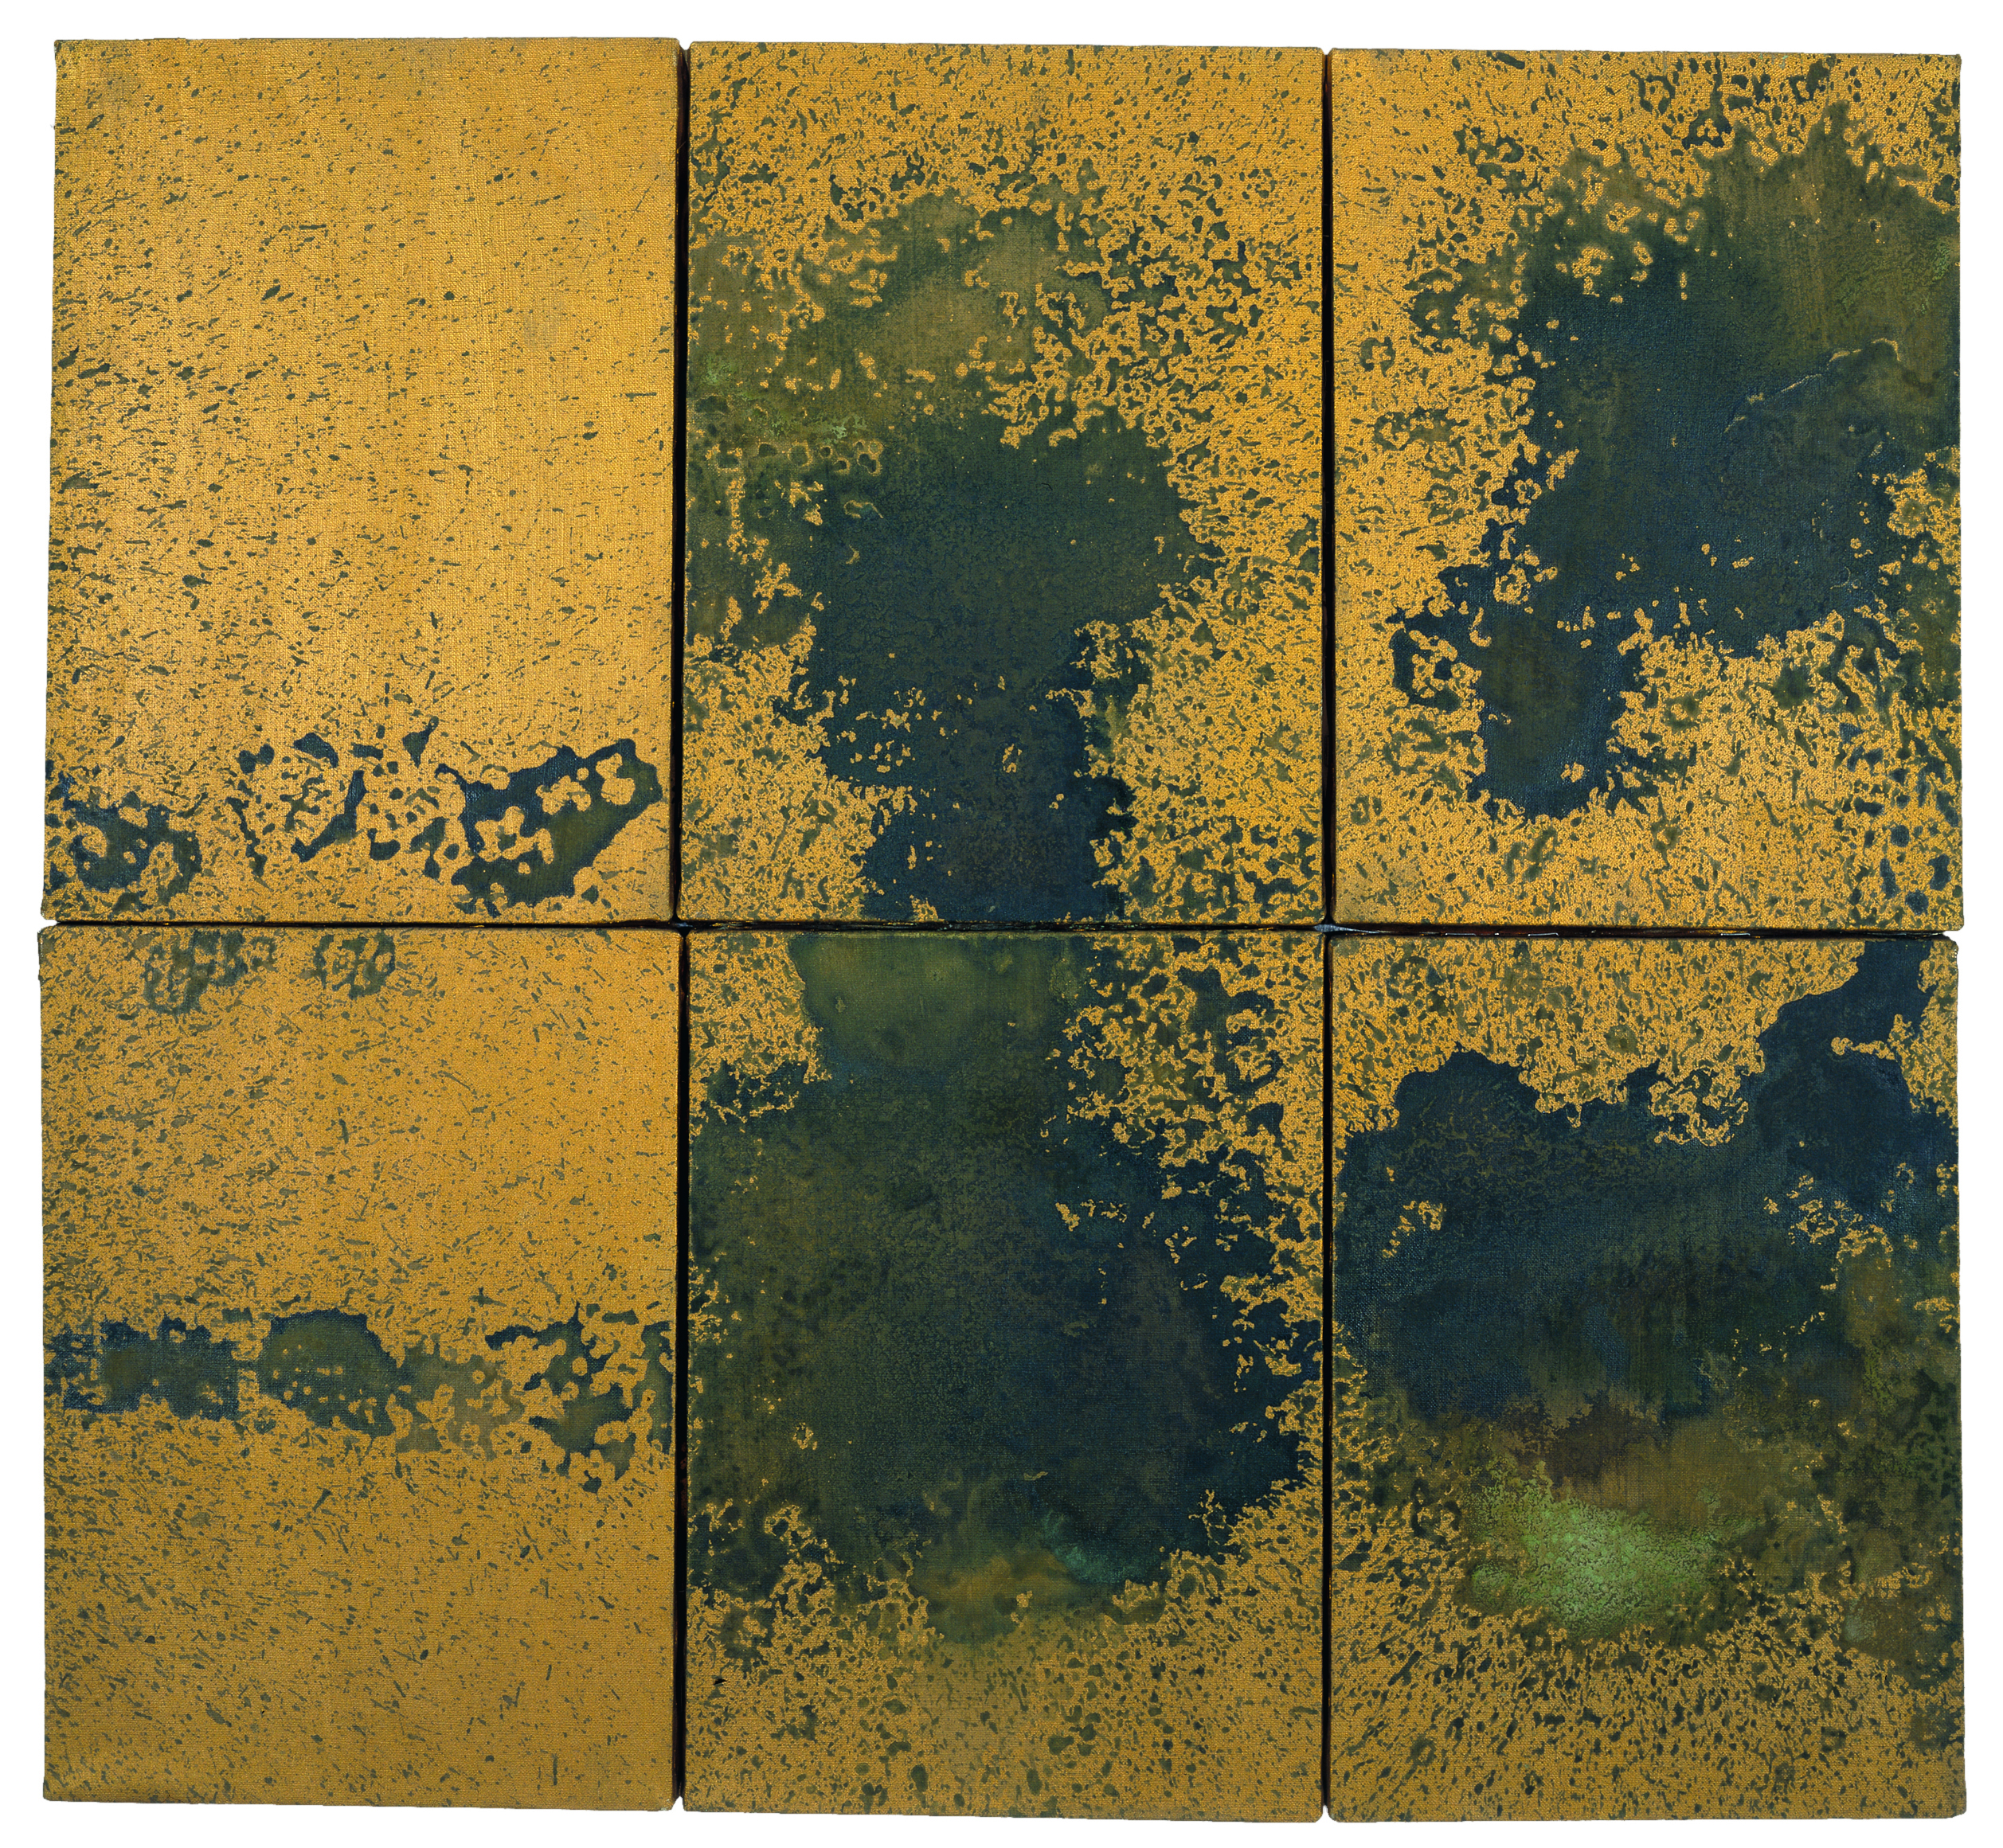 Andy Warhol, Oxidation, 1977–78, urine and metallic paint on linen, six canvases. Present 